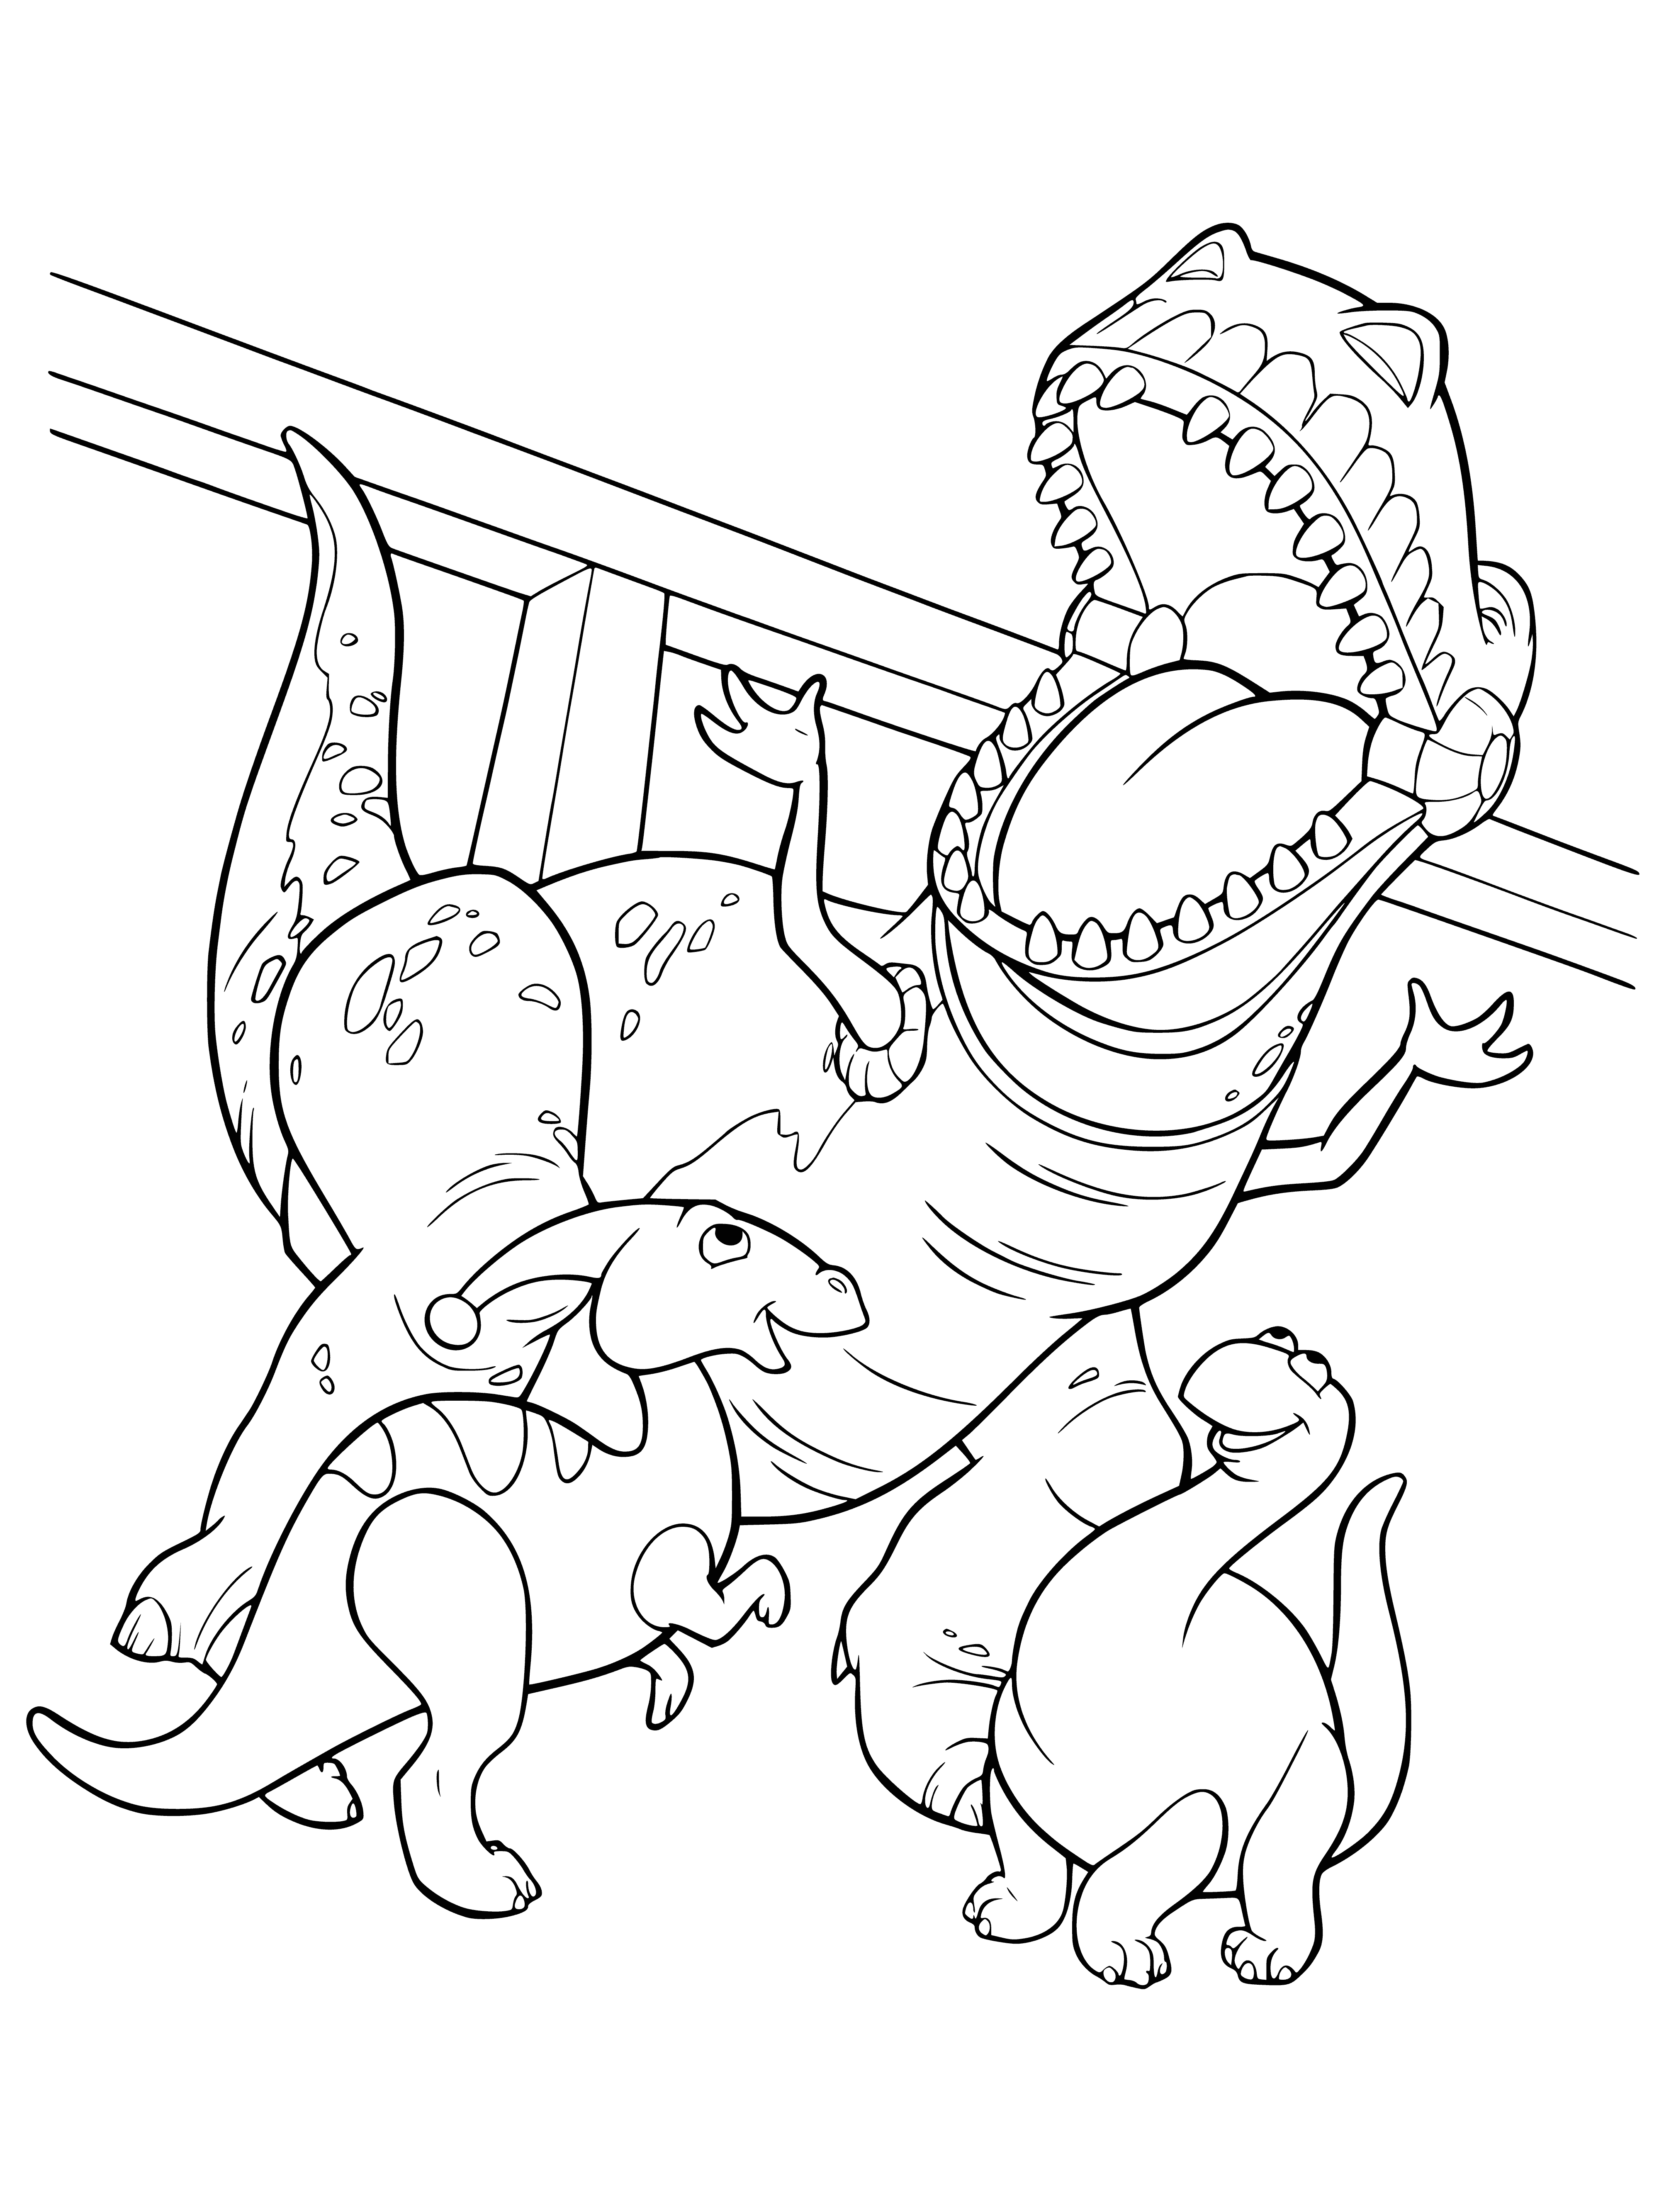 coloring page: 3 dinos in coloring page- green biggest, blue & yellow smaller, all 3 eyes closed.